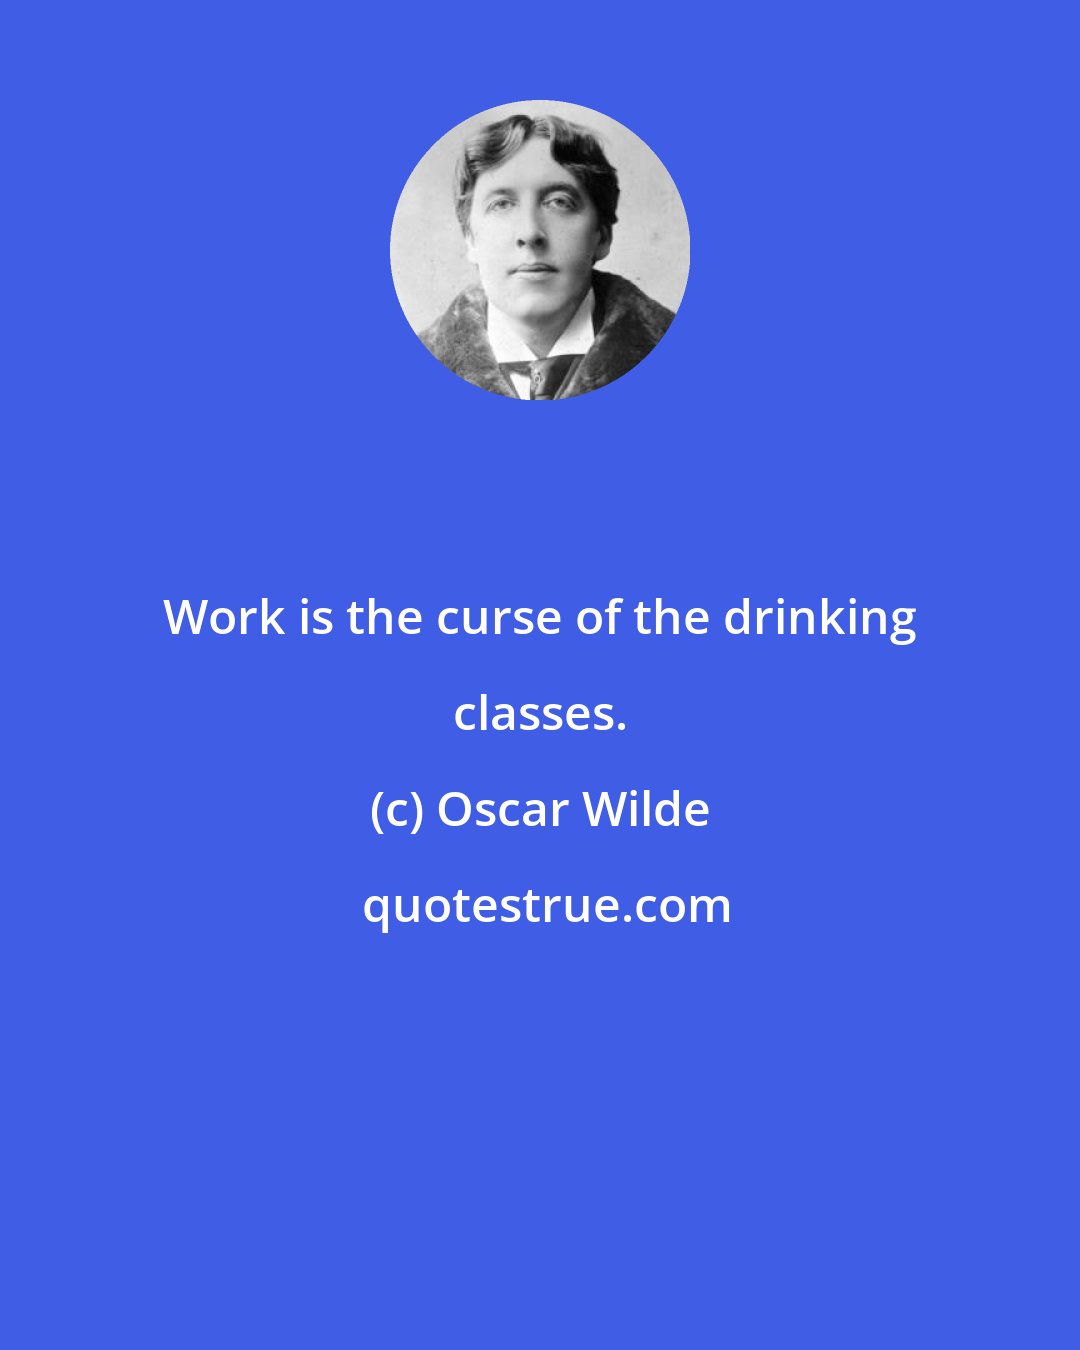 Oscar Wilde: Work is the curse of the drinking classes.